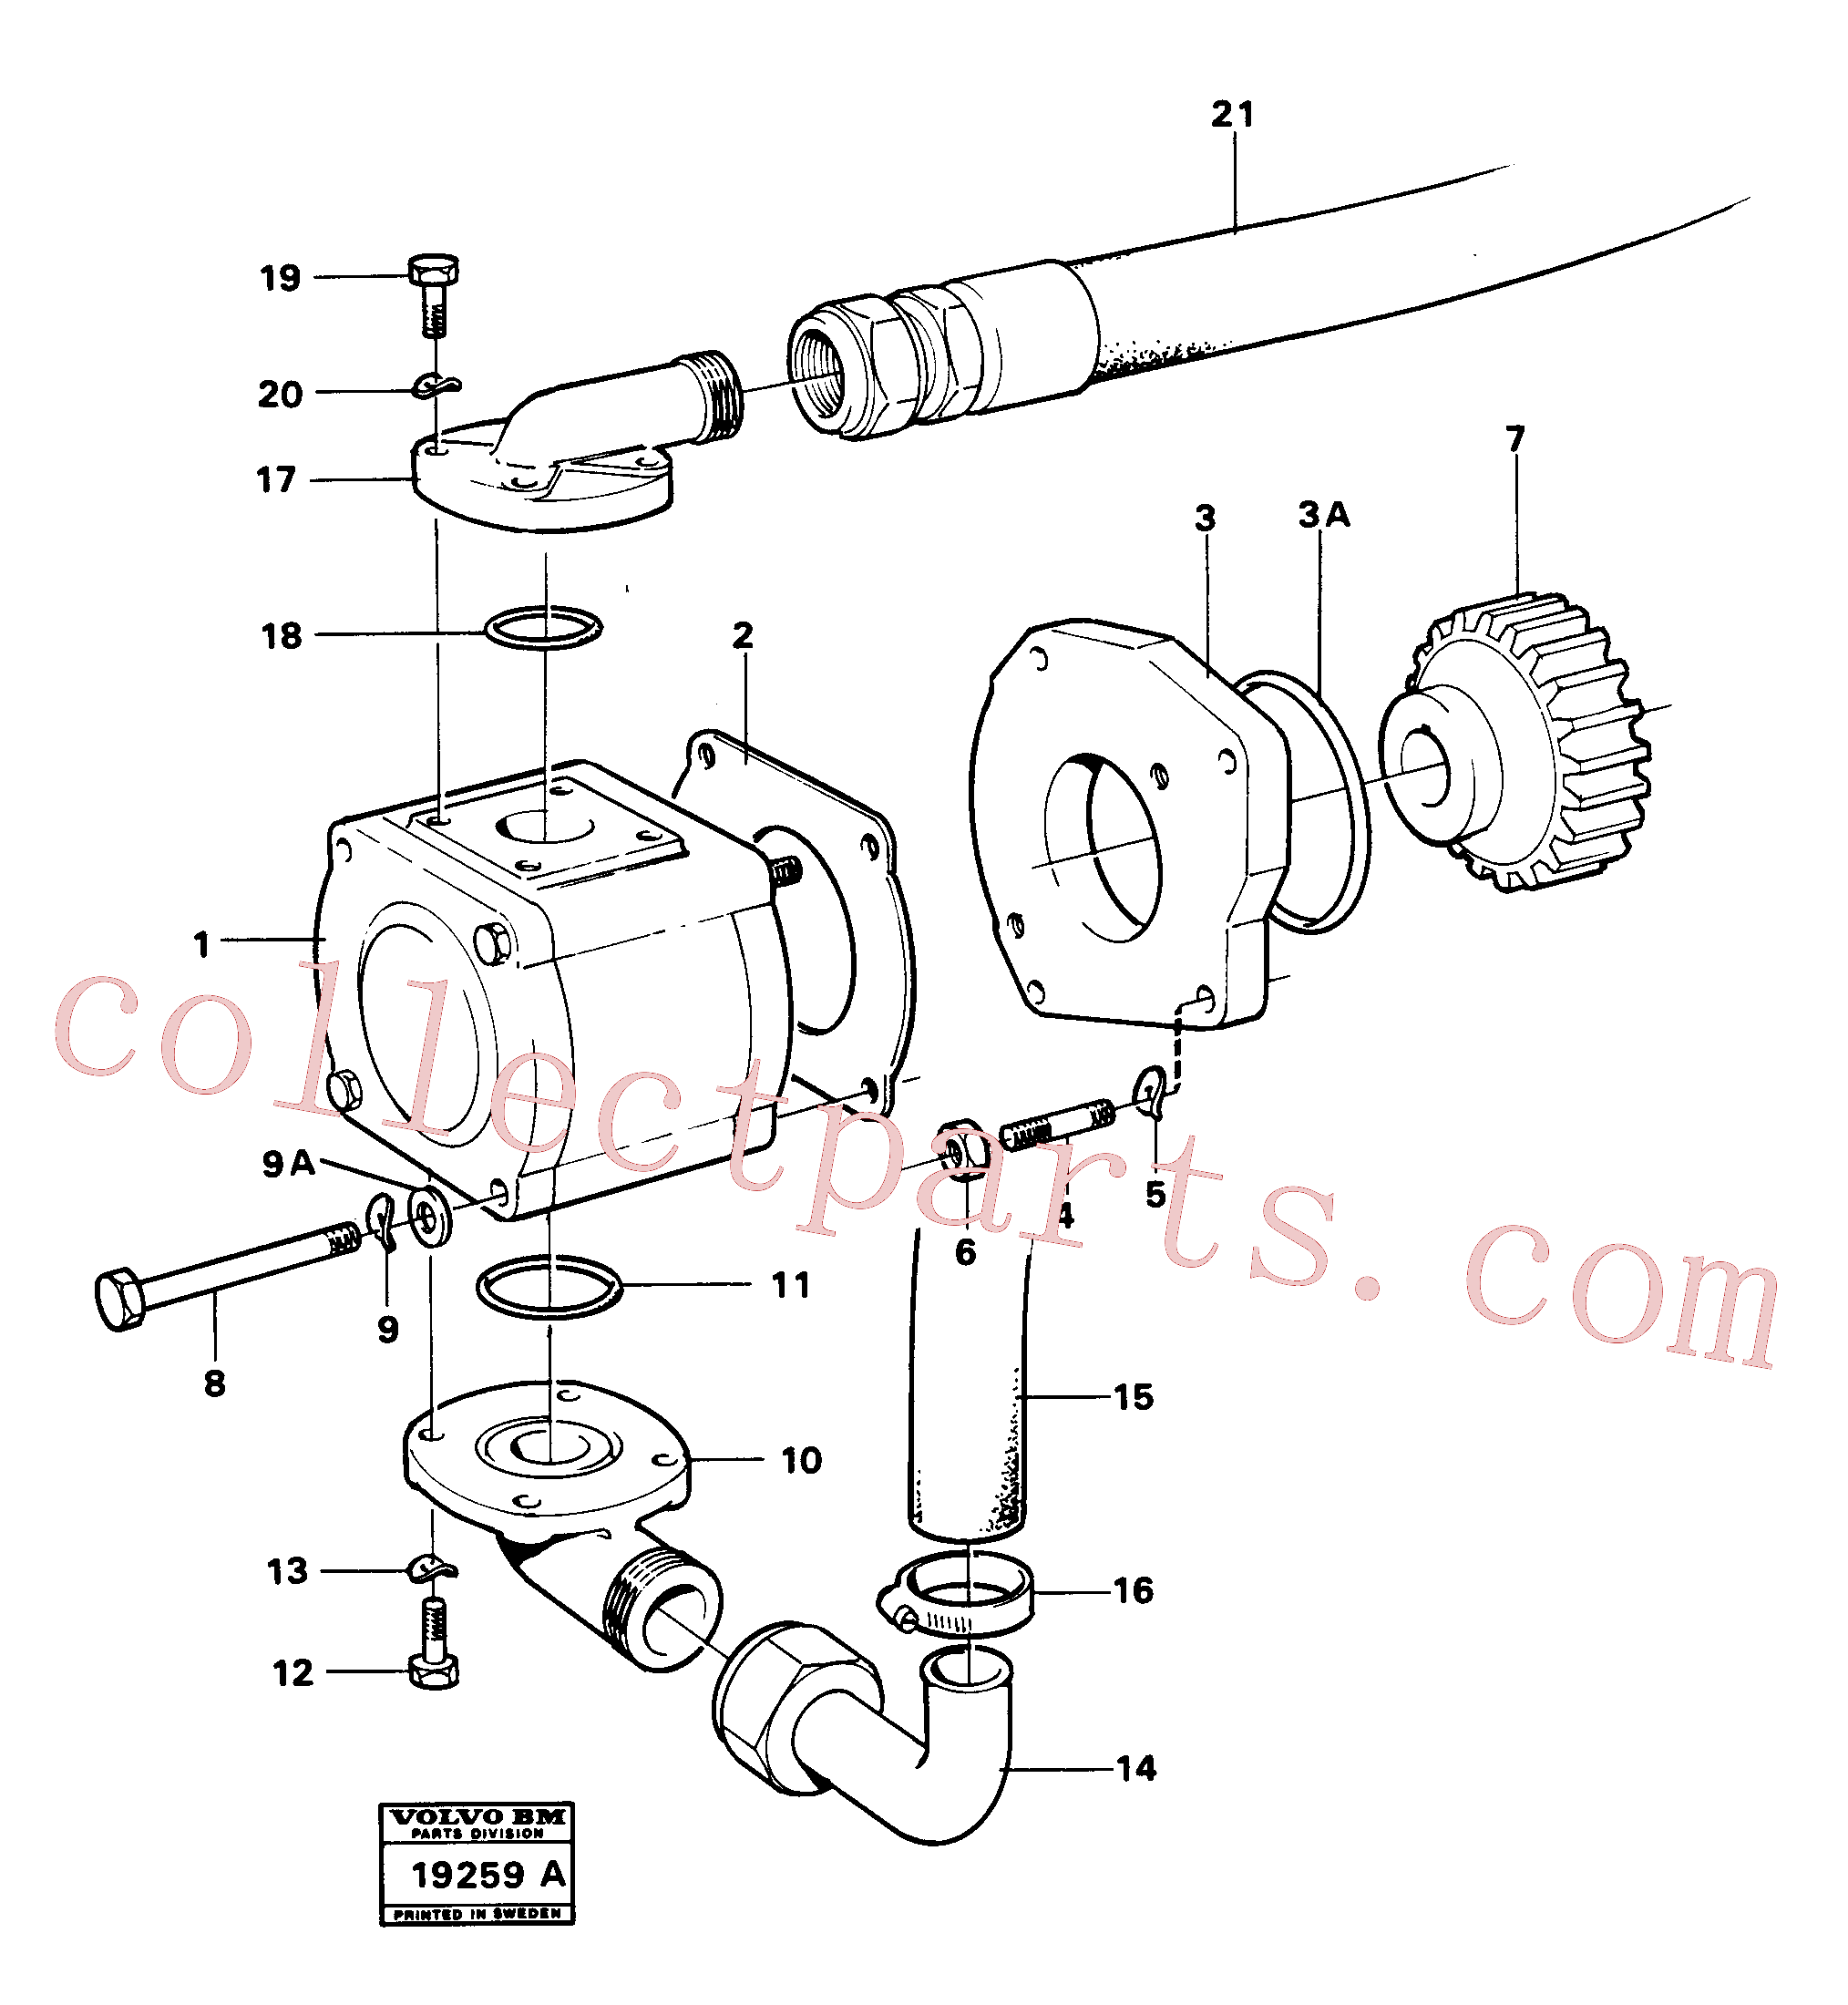 VOE958227 for Volvo Pump with fitting parts(19259A assembly)